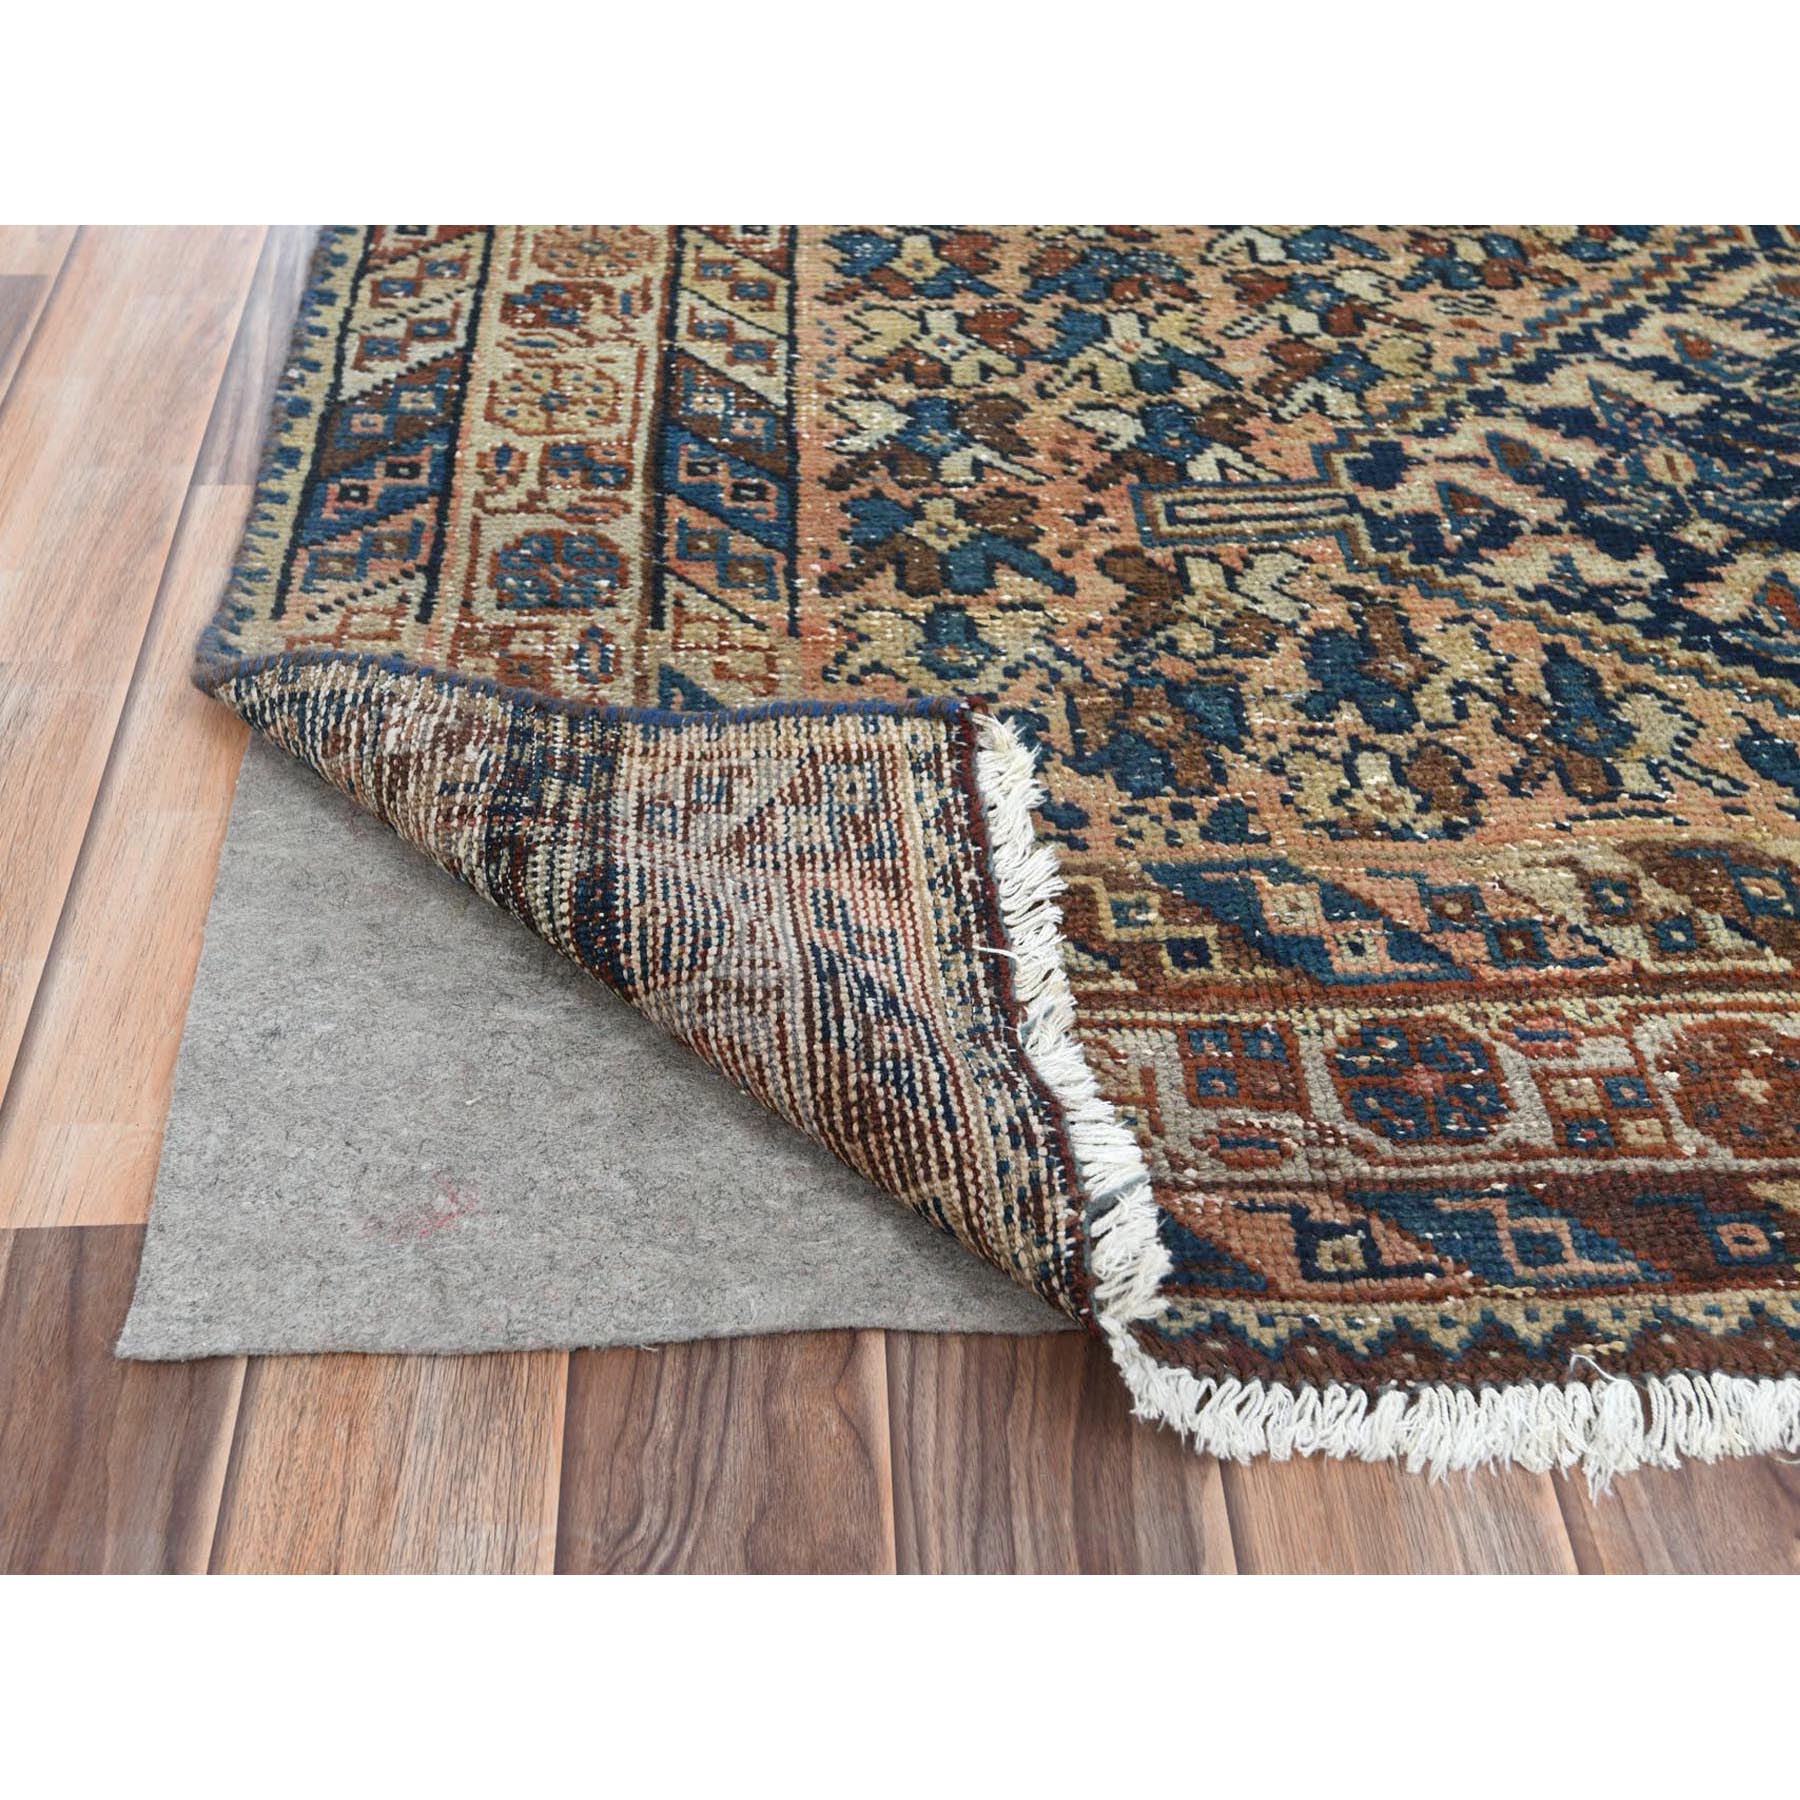 5'x6'6" Sand Color Vintage Persian Khamseh with Serrated Medallion Design, Hand Woven Pure Wool, Distressed Look, Sheared Low Oriental Rug 